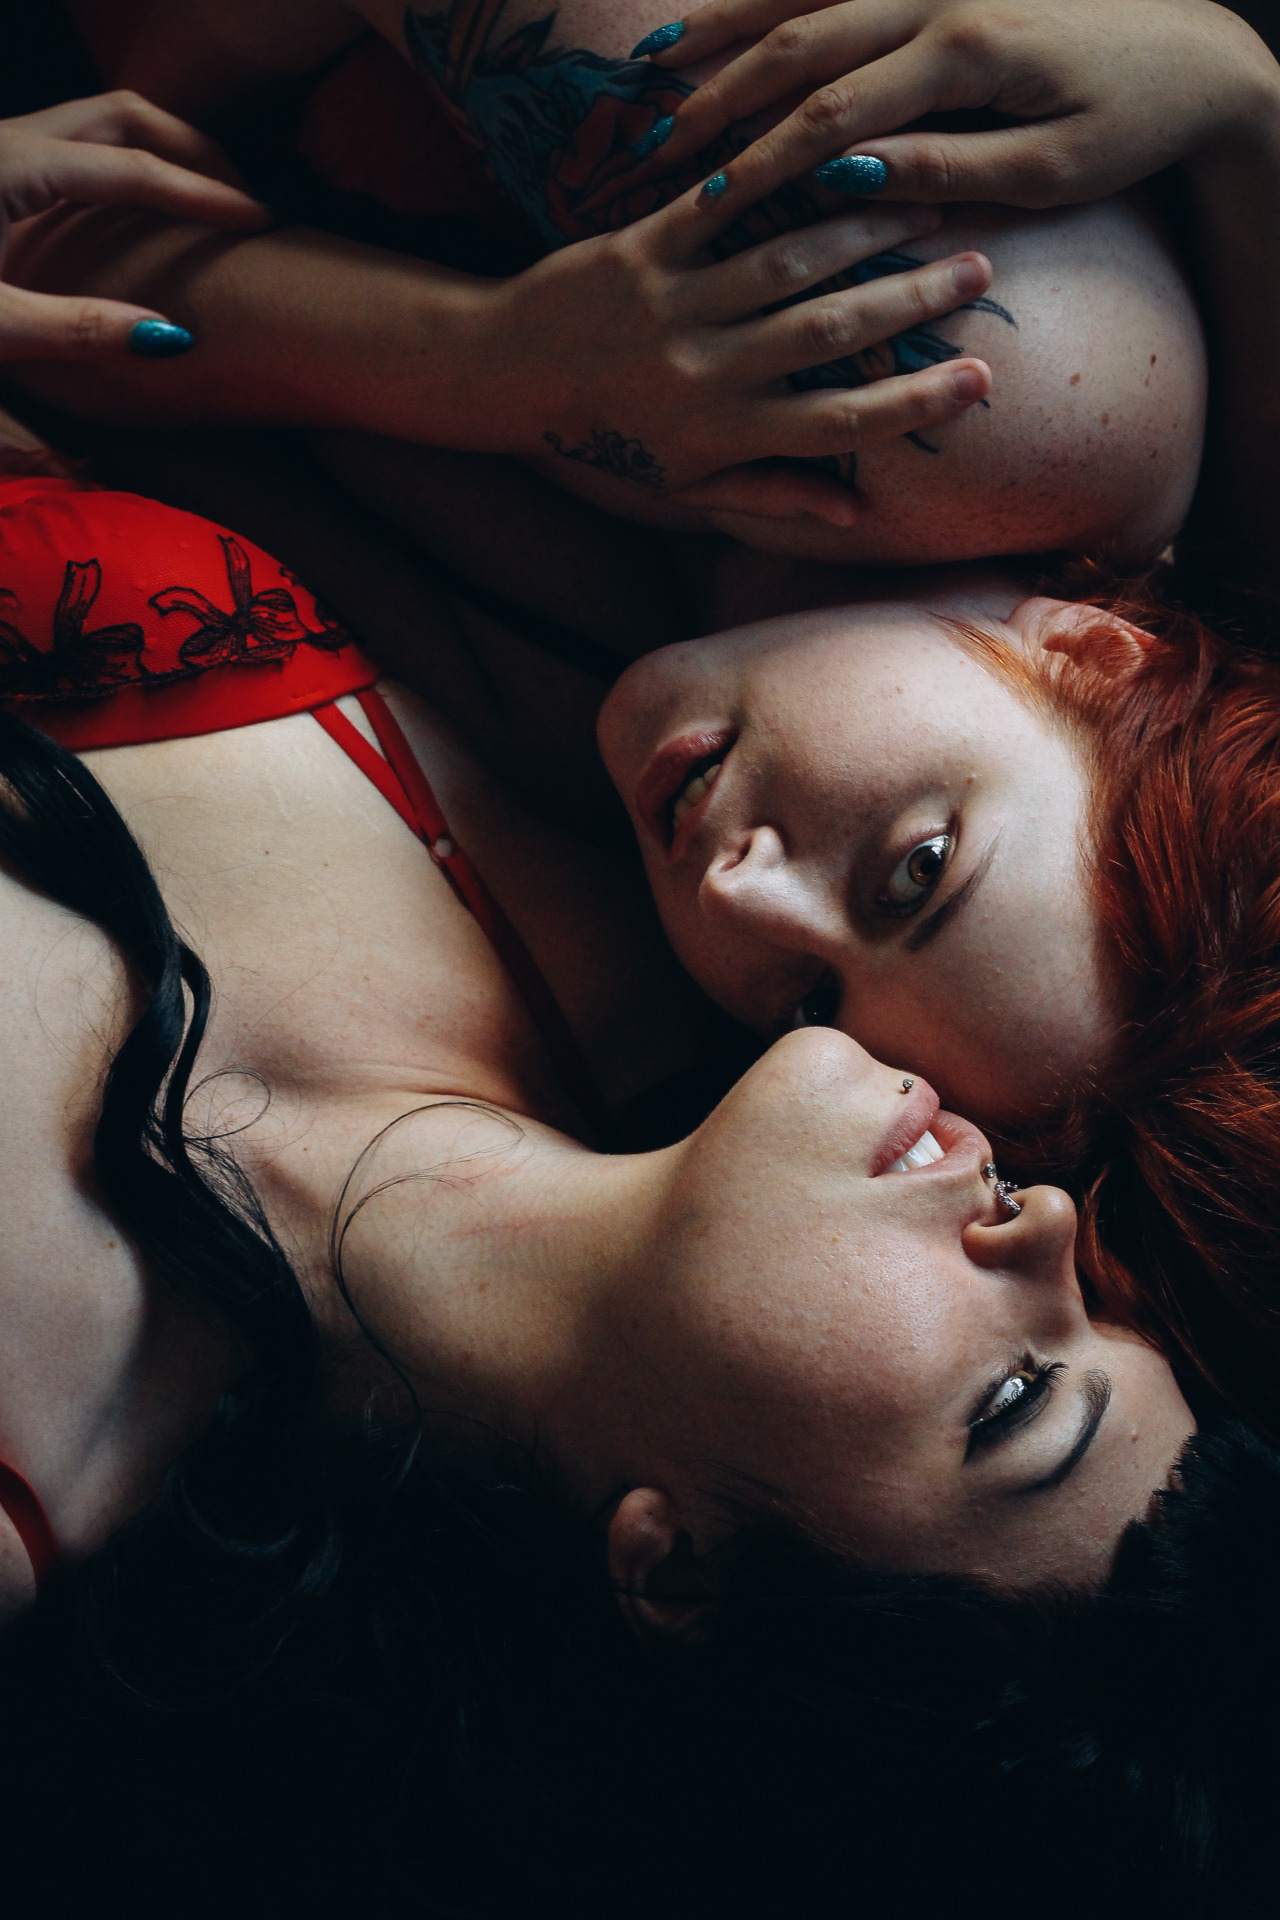 “Subtle Seduction”Katja and I are body positive models that aim to break AND challenge traditional beauty standards through our art. This set as a whole is meant to showcase beauty, even though we may not fit society’s definition of it. It’s